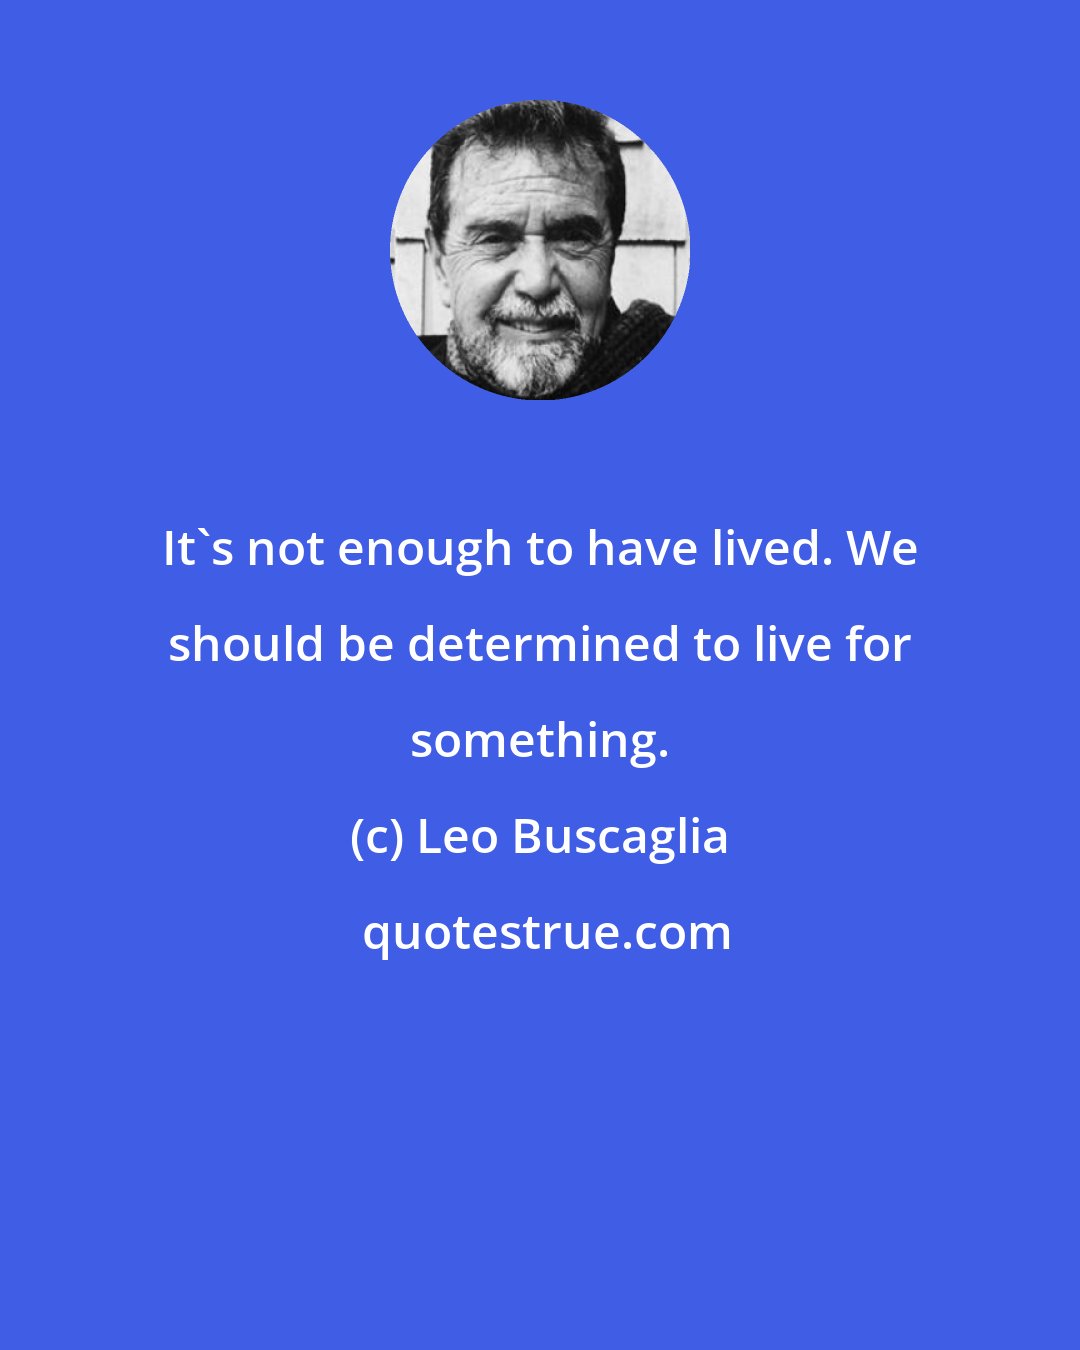 Leo Buscaglia: It's not enough to have lived. We should be determined to live for something.